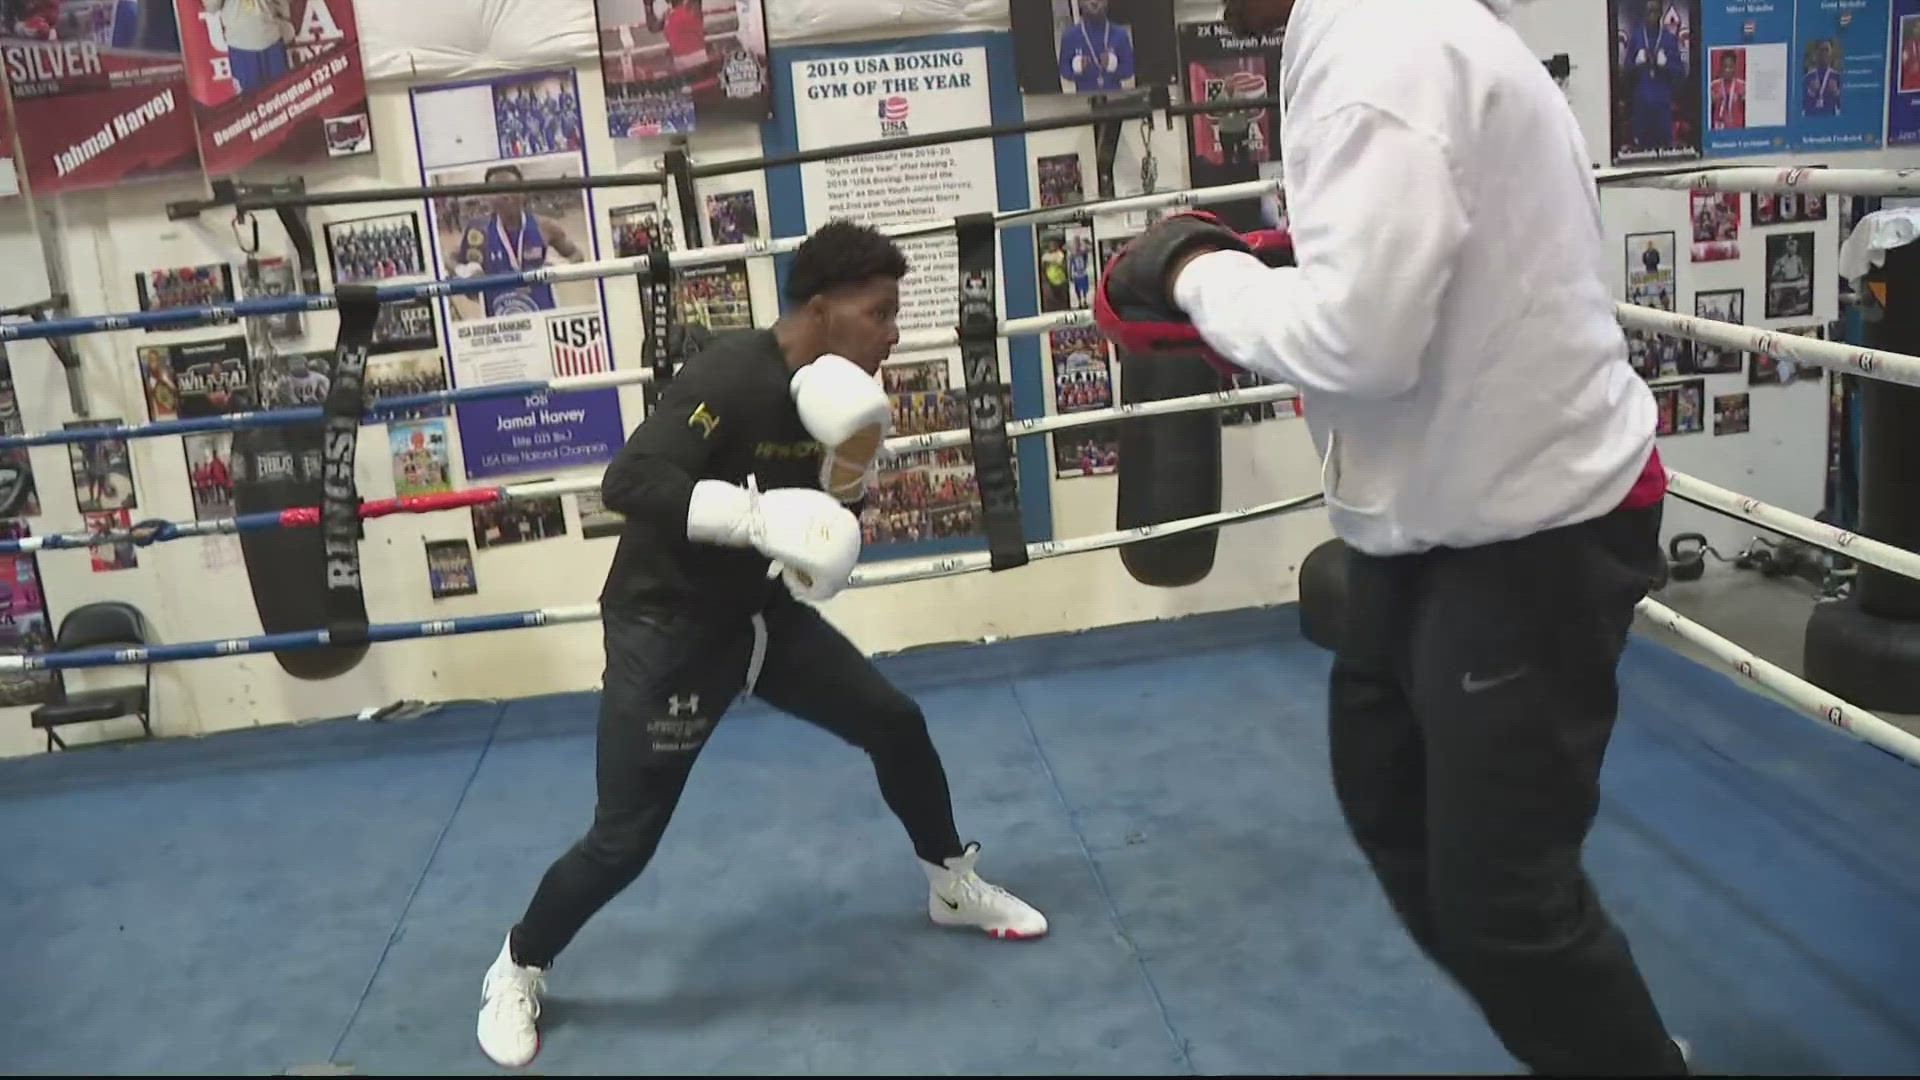 THERE'S A BOXER OUT OF PRINCE GEORGE'S COUNTY WHO WANTS TO BRING THAT OLYMPIC GOLD BACK TO THE DMV.